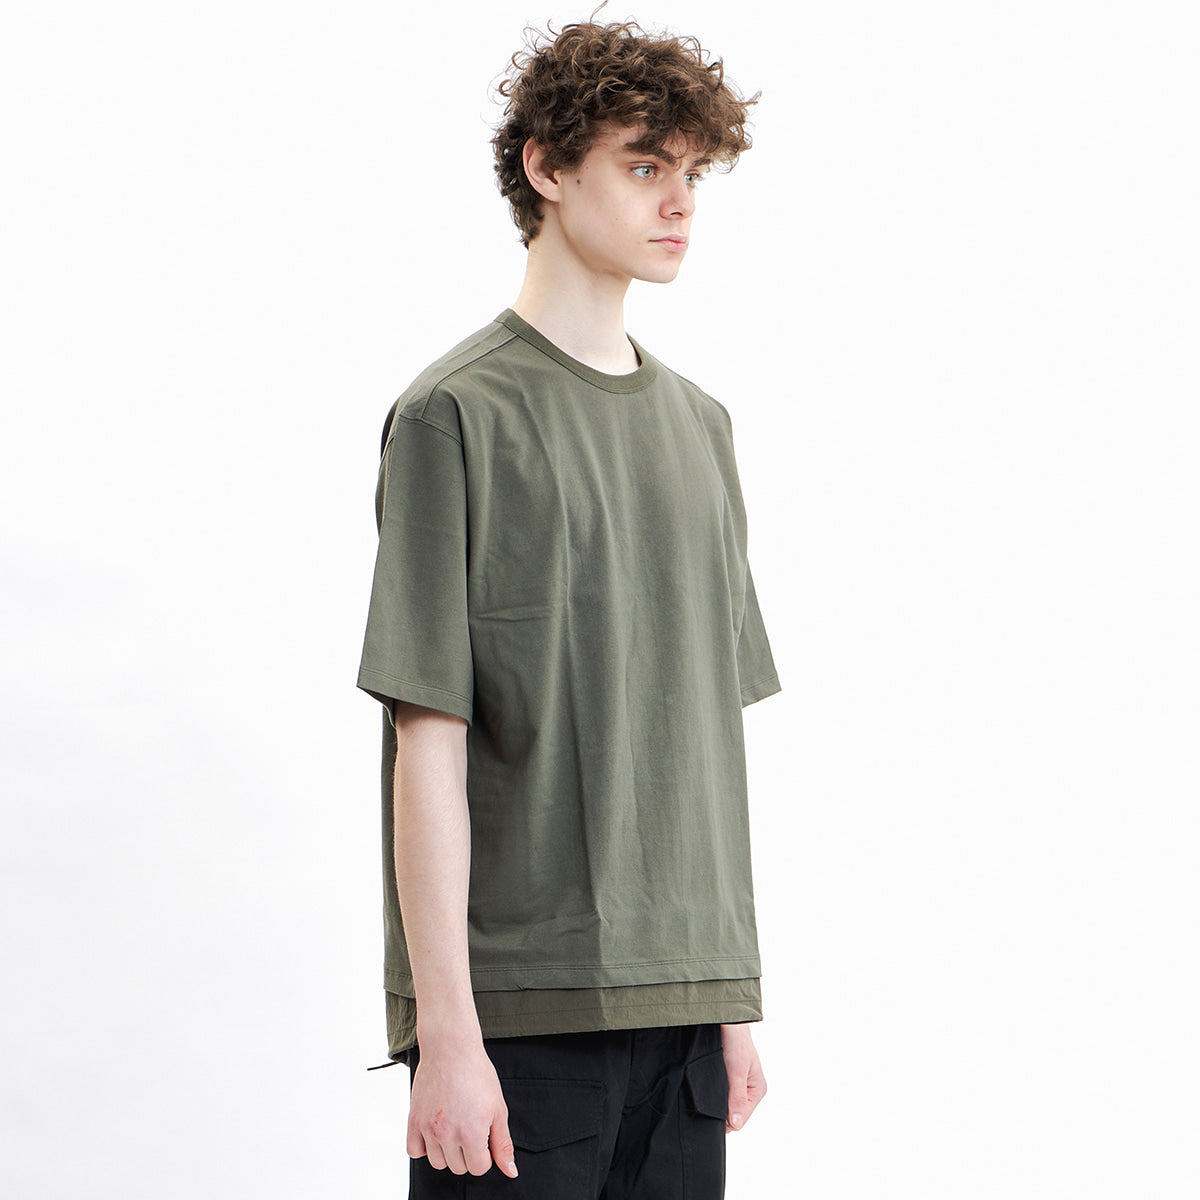 EASTLOGUE 2021SSCS03 FISHTAIL T-SHIRT - OLIVE